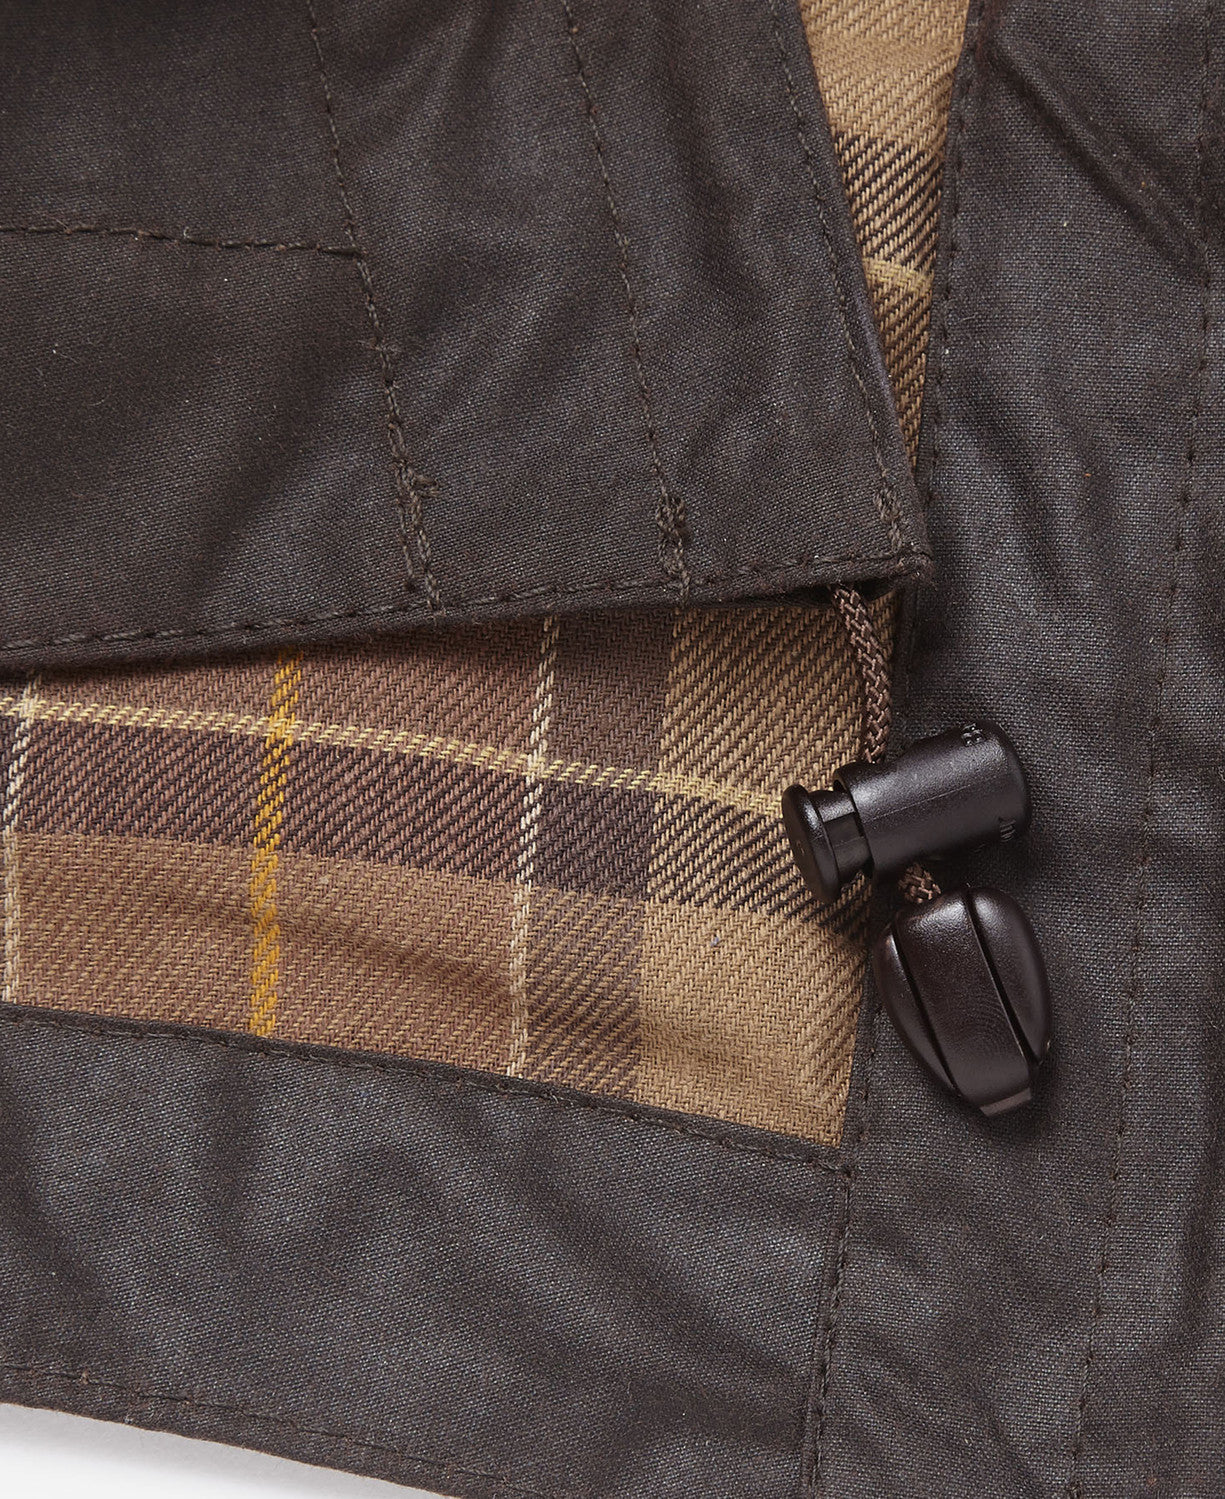 Barbour Waxed Cotton Hood | Barbour Interactive Hoods – Sam Turner & Sons